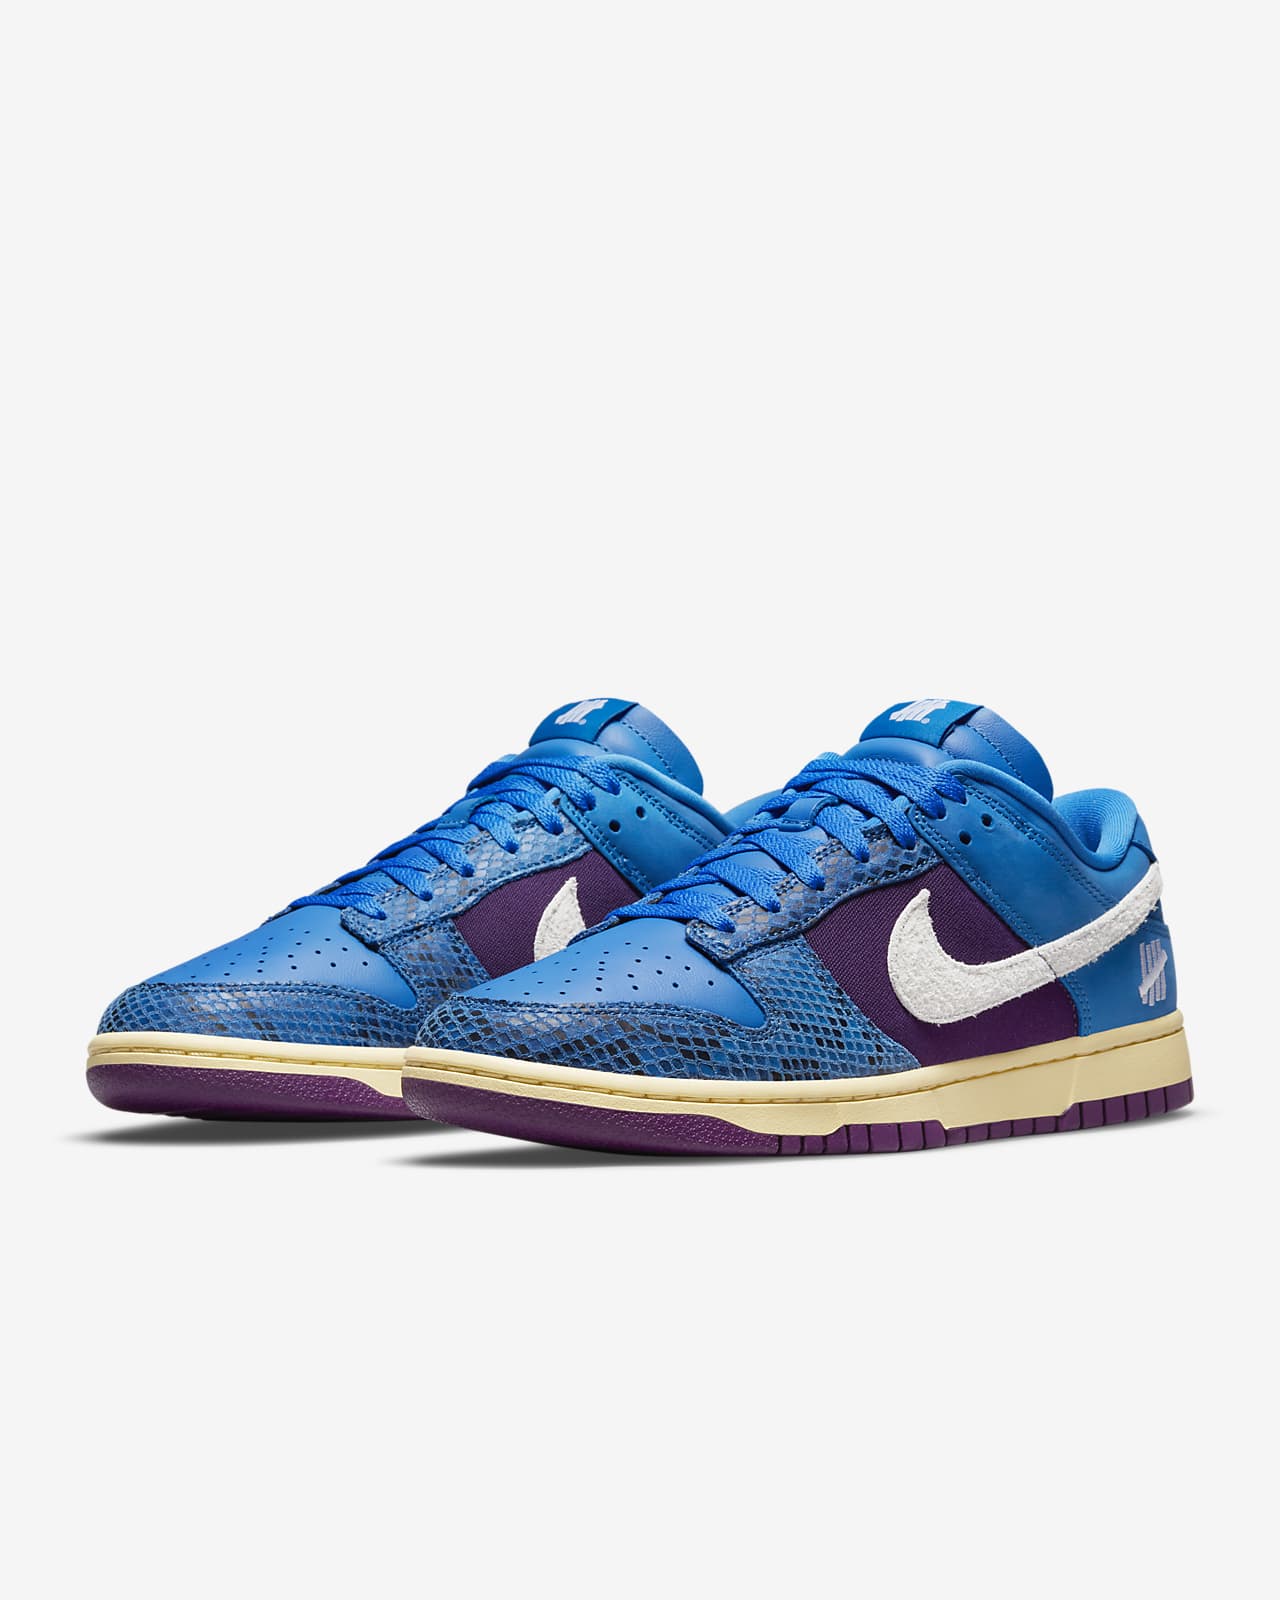 NIKE DUNK LOW undefeated購入　新品未使用 26.5㎝